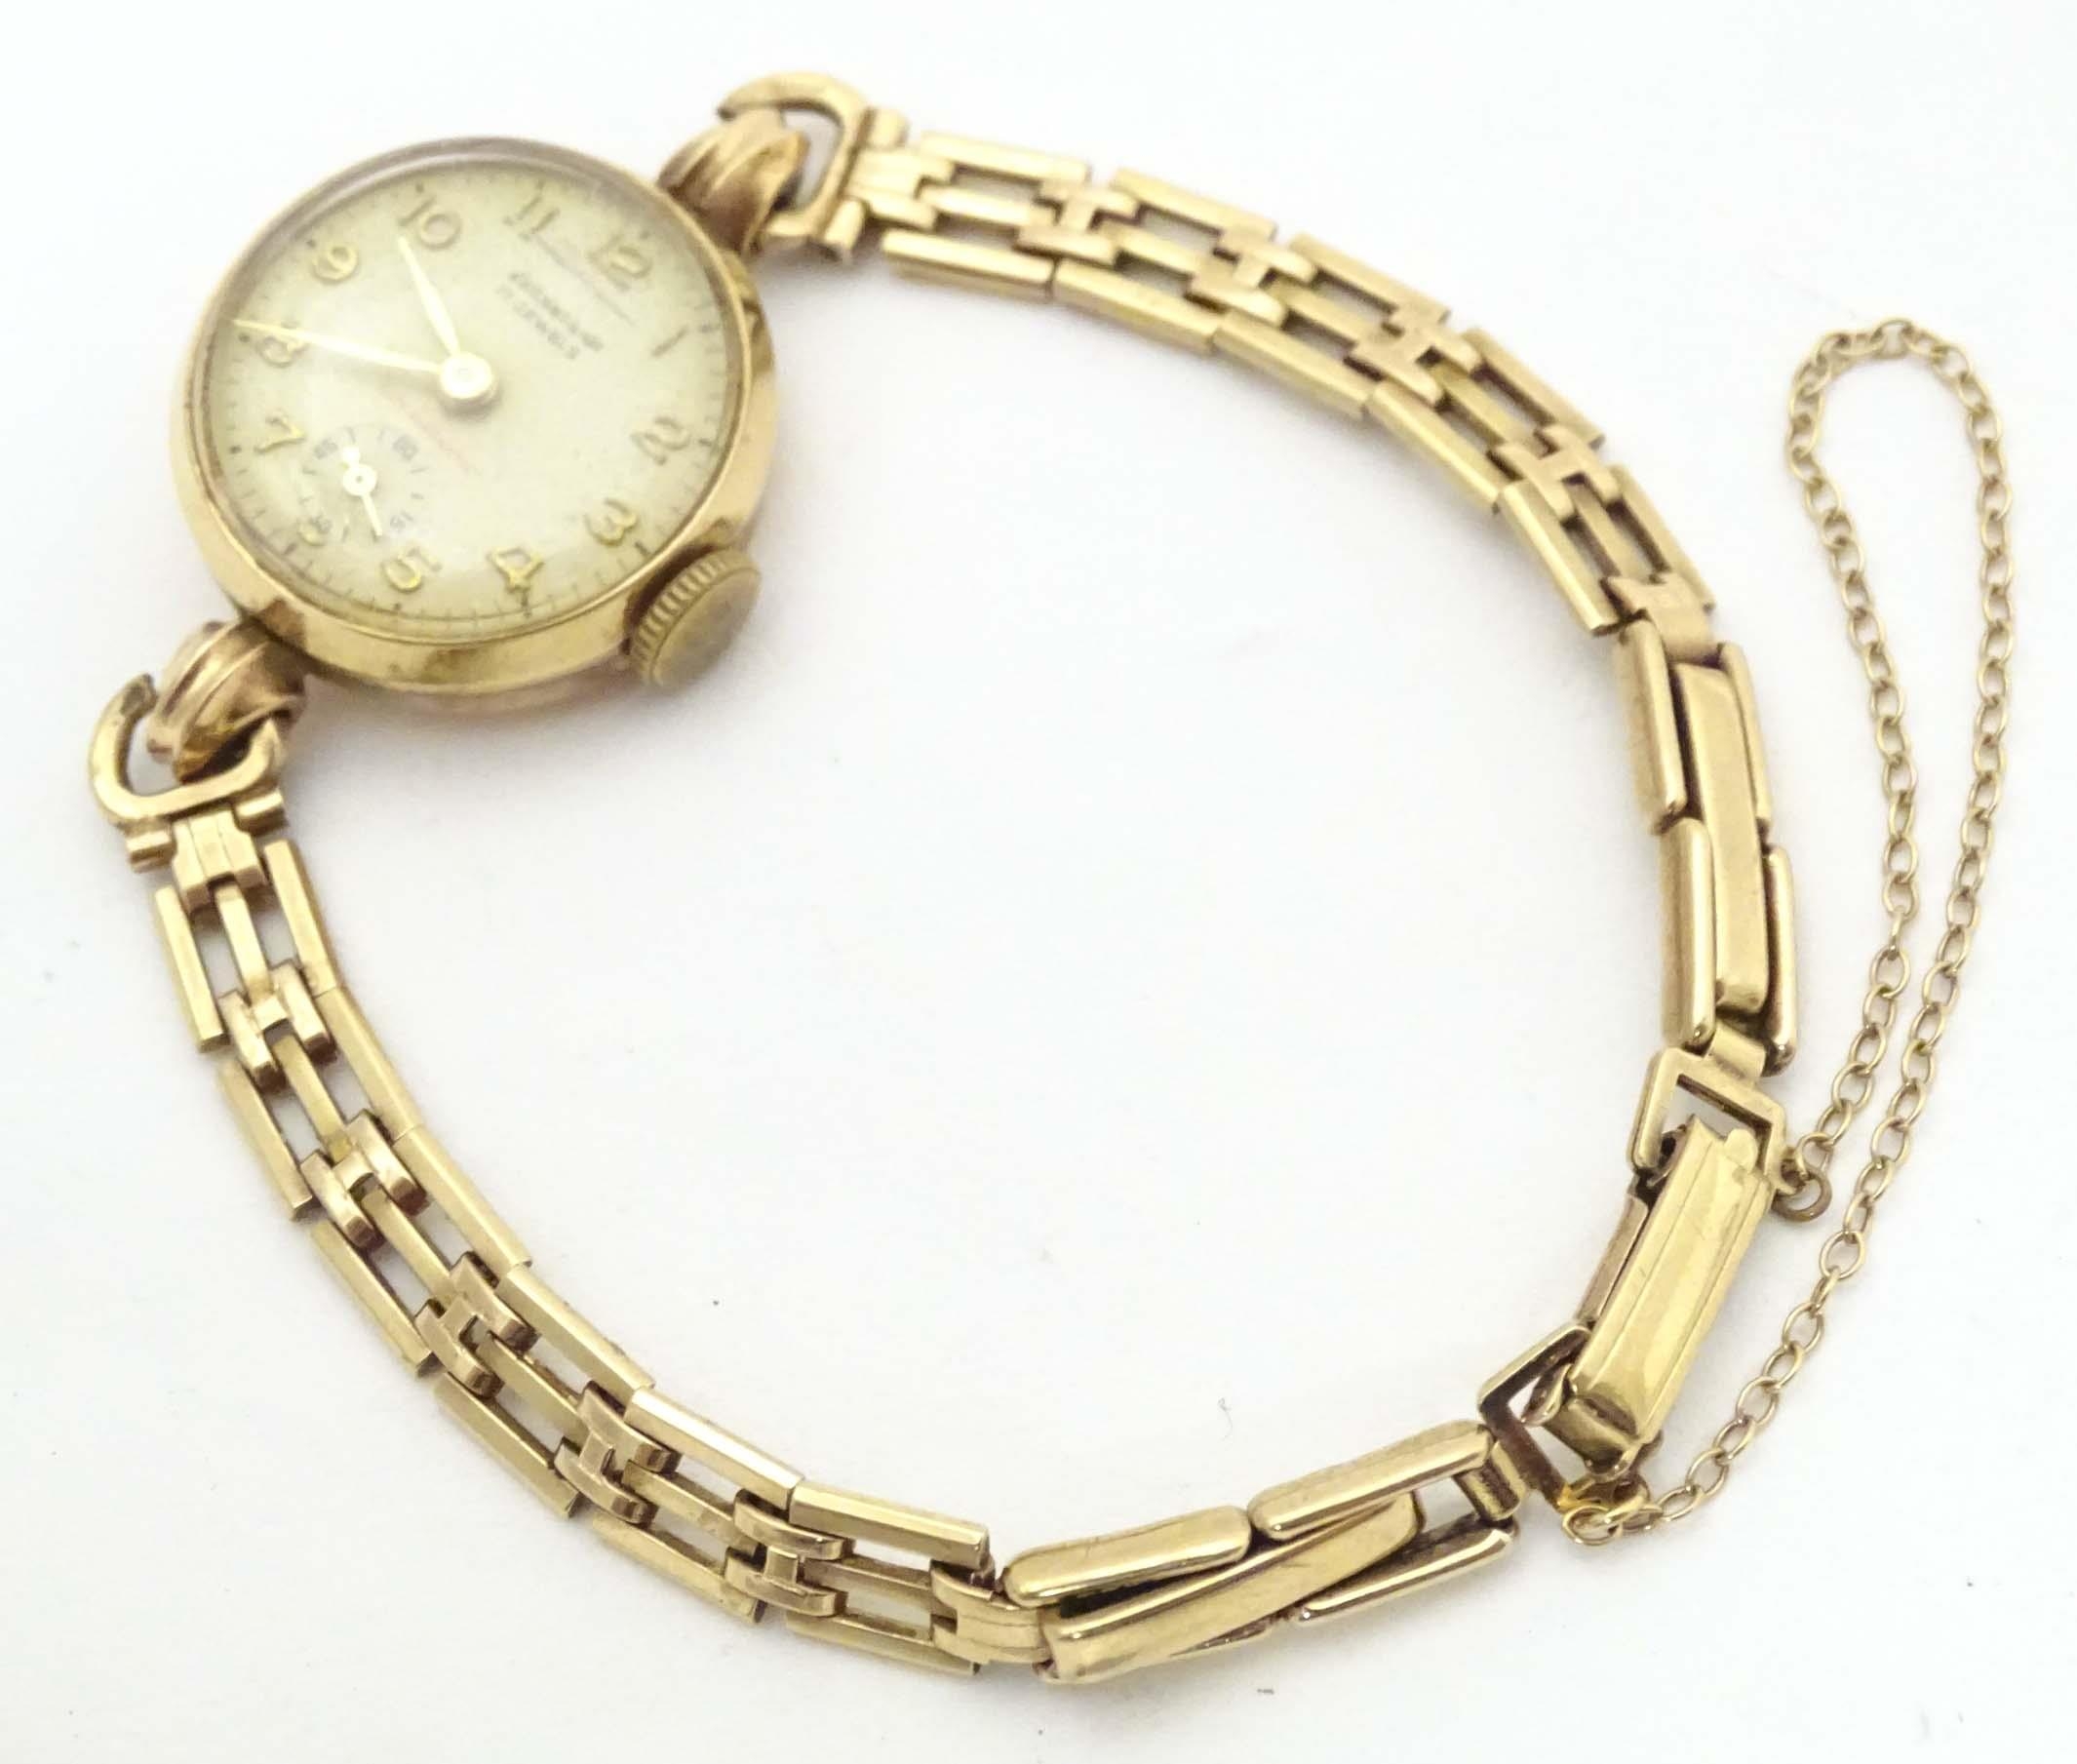 A ladies Frankland wrist watch, the dial signed Frankland 17 jewels and with inset seconds dial - Image 5 of 8